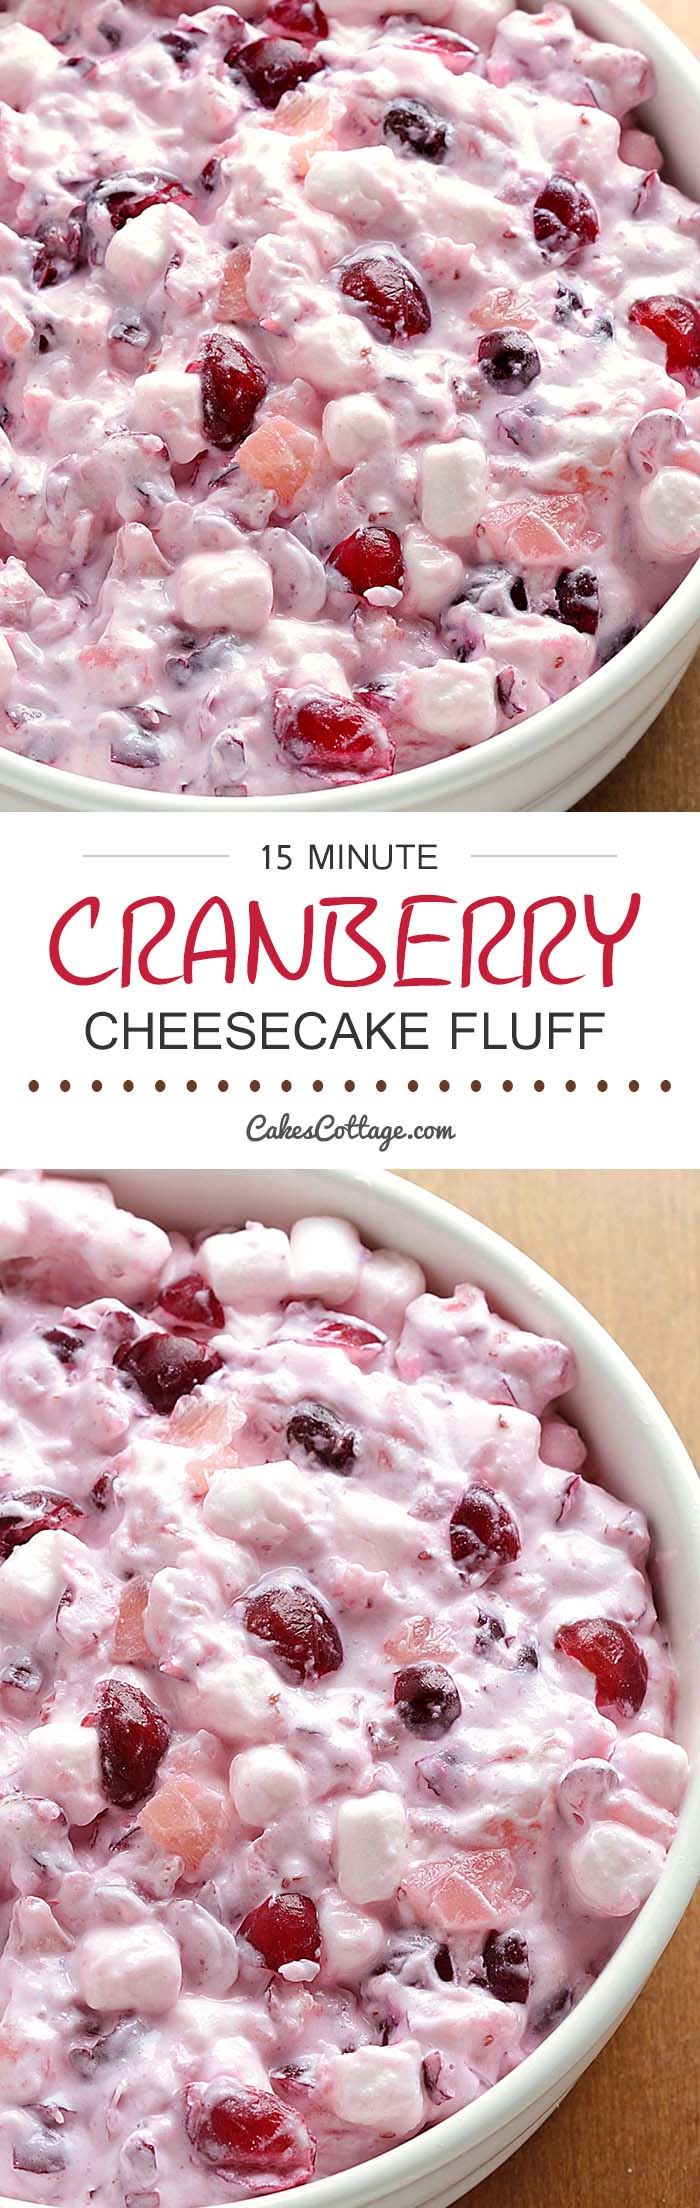 Cranberry Cheesecake Fluff Salad – delicious, absolutely loaded with cranberries tossed in a thick, rich and creamy cheesecake mixture, a must have for Thanksgiving and Christmas family get-togethers